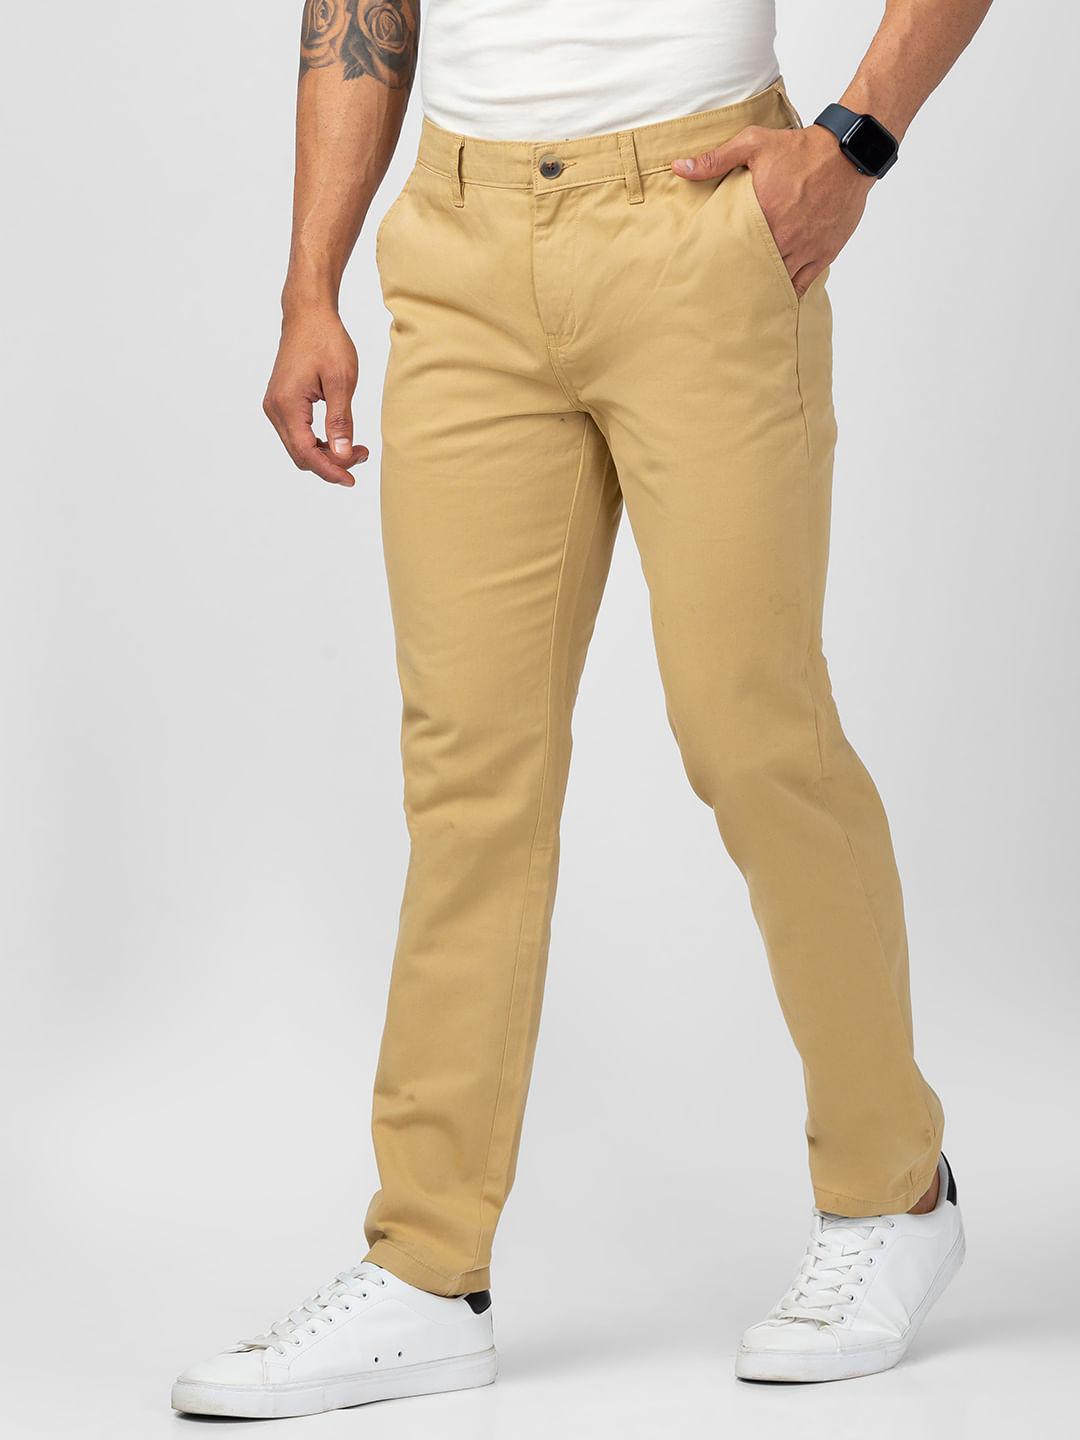 CP BRO Mens Moderate Fit Solid Khakhi Color Trousers | To2-09 B-Kha-Mf